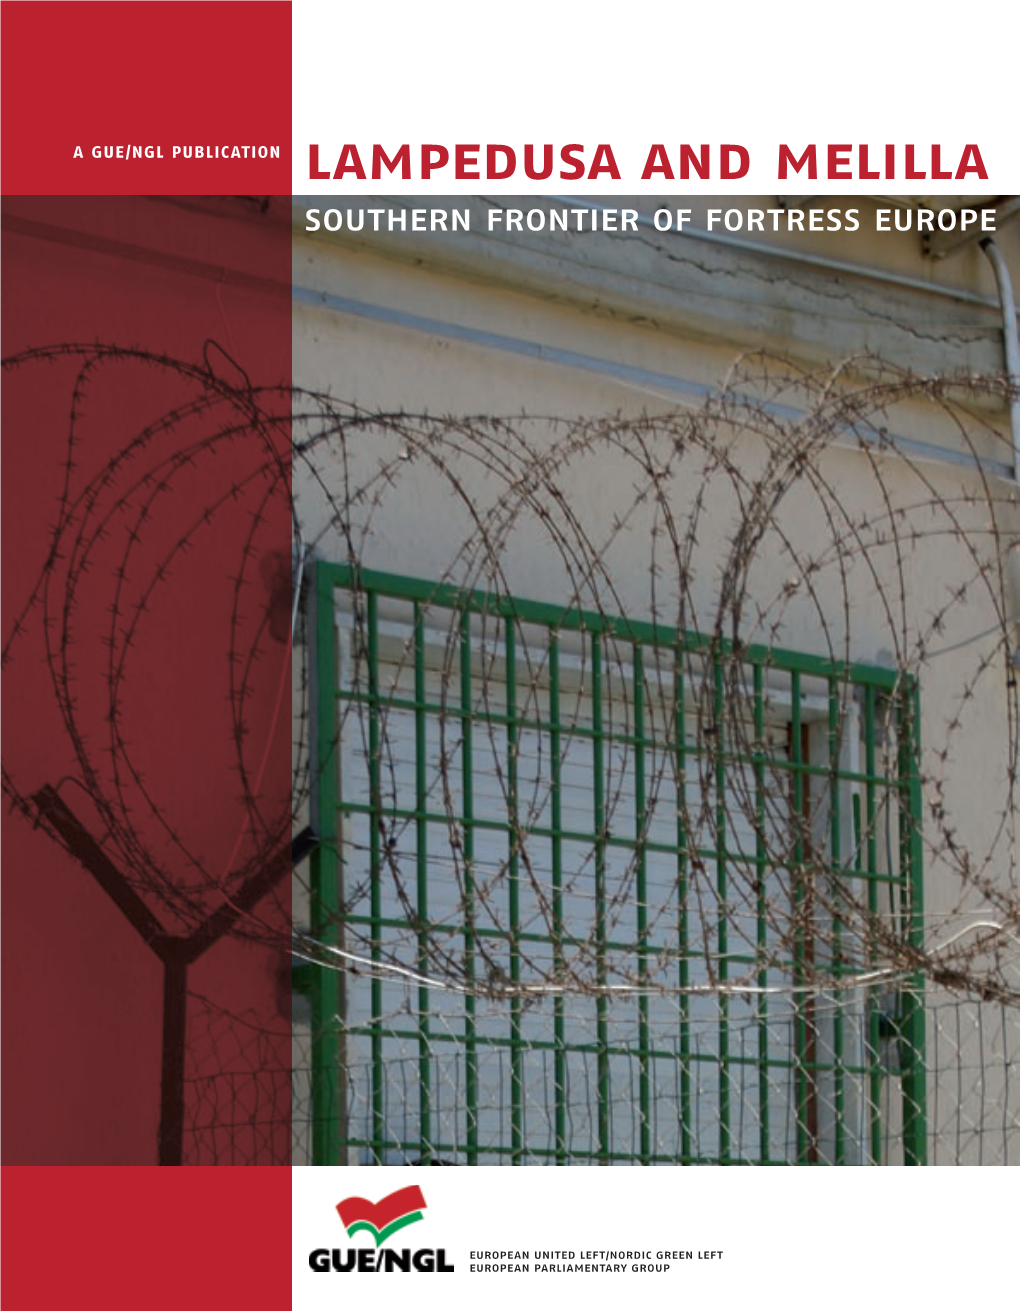 Lampedusa and Melilla Southern Frontier of Fortress Europe